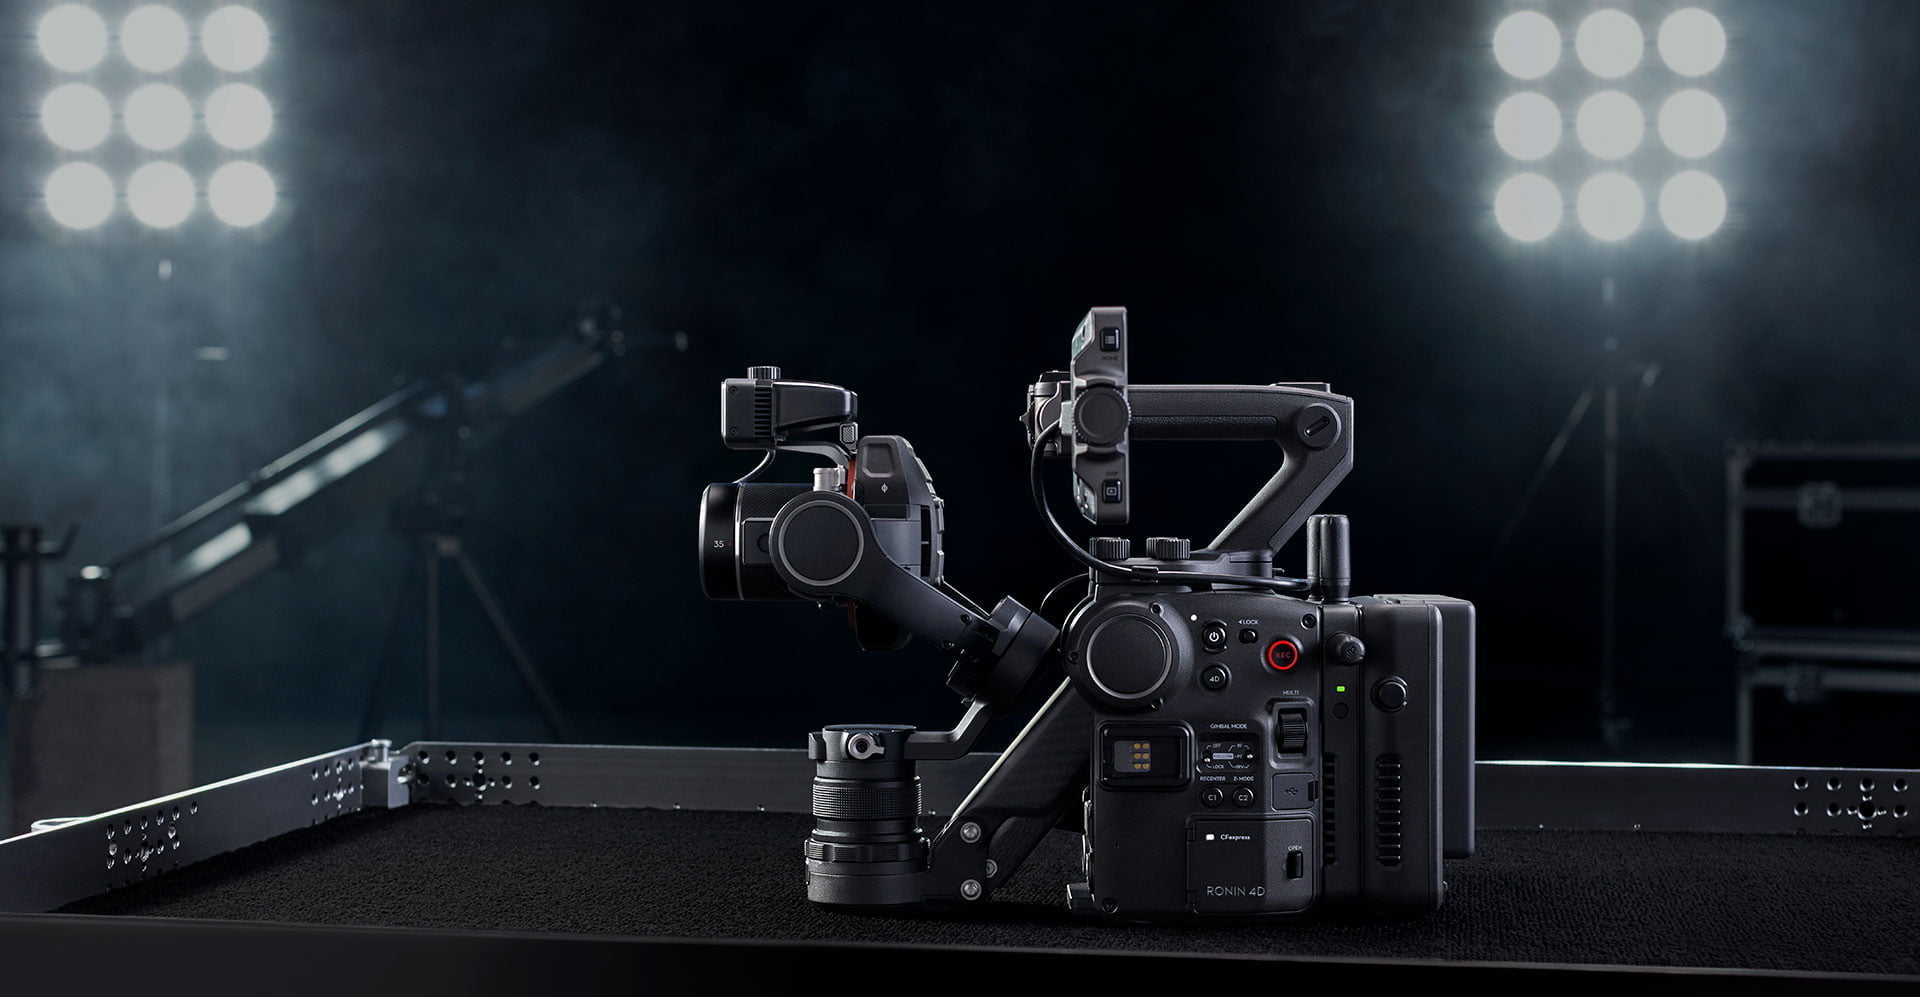 4-axis stabilization for smooth camera performance